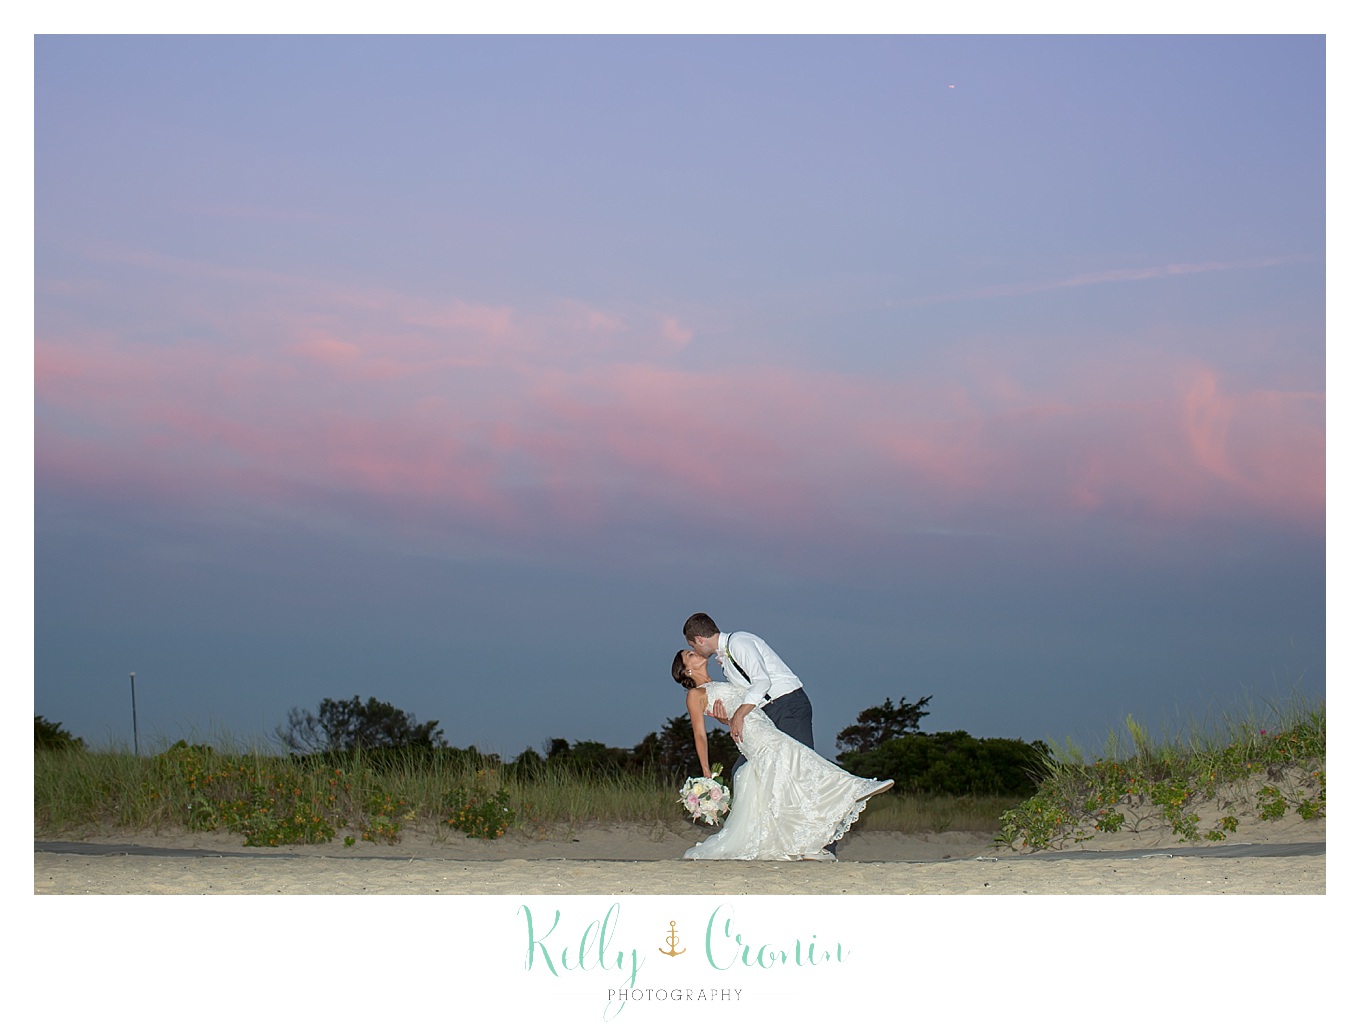 A groom kisses his bride in front of a sunset.